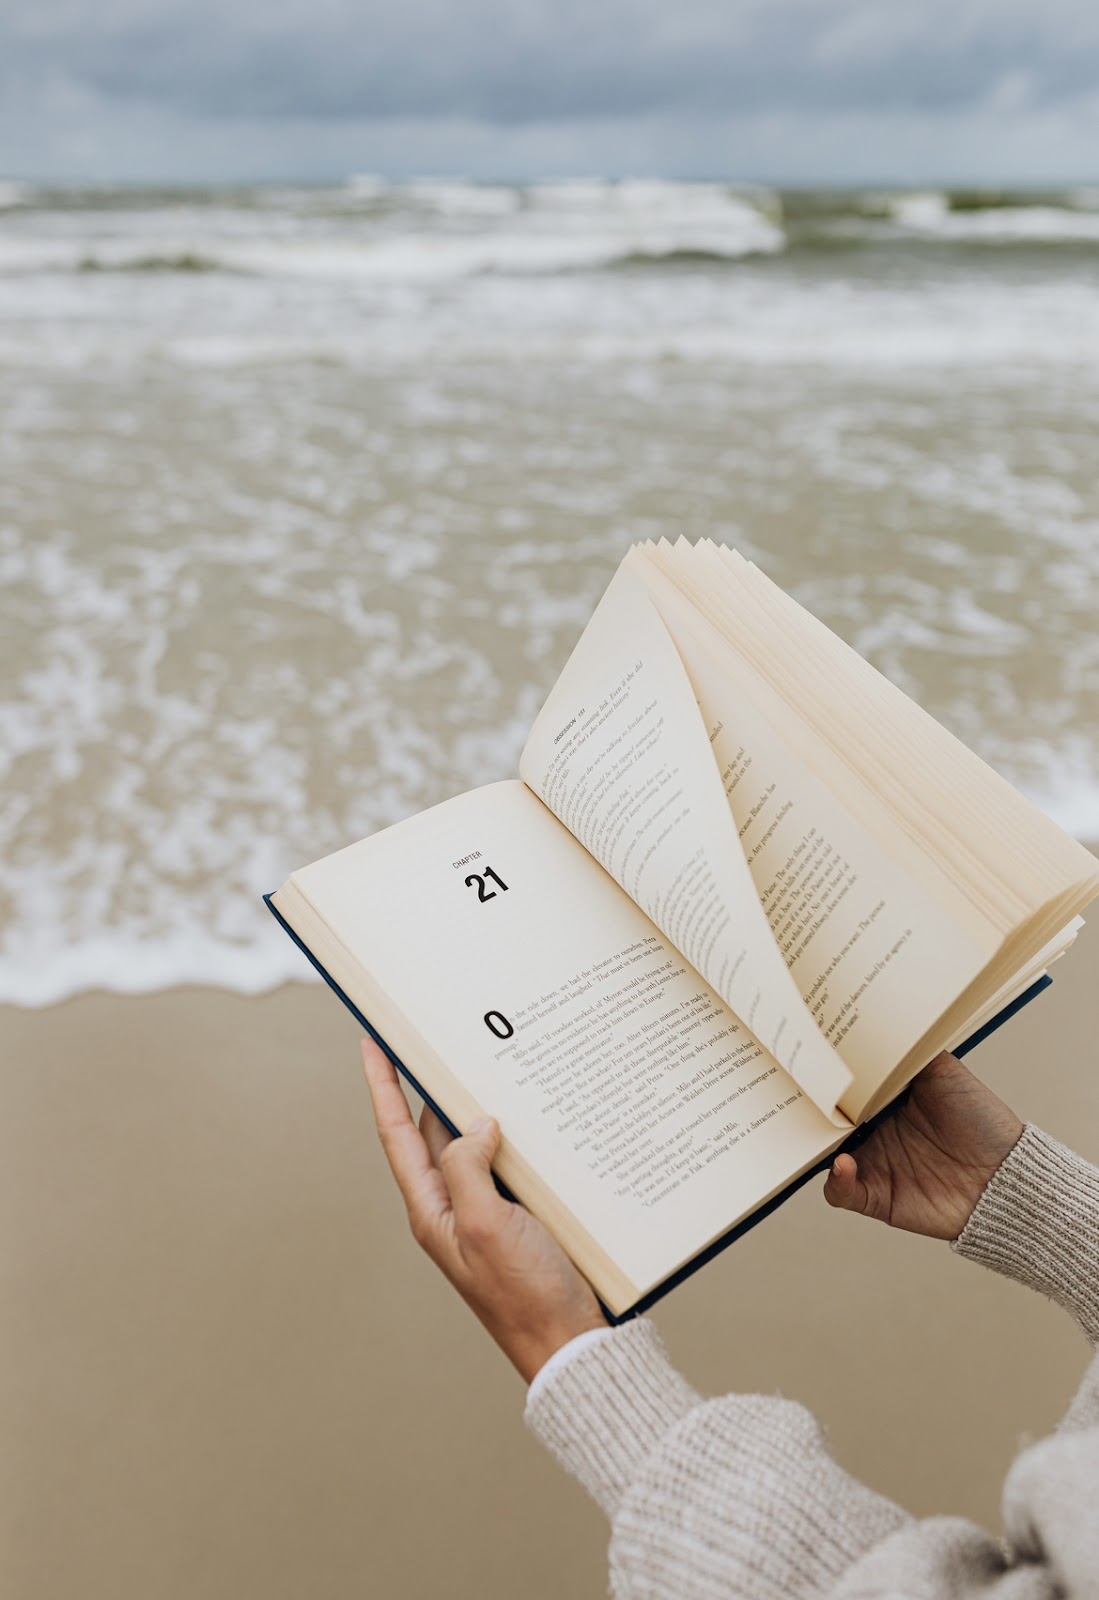 Sea and book on somebody’s hands.